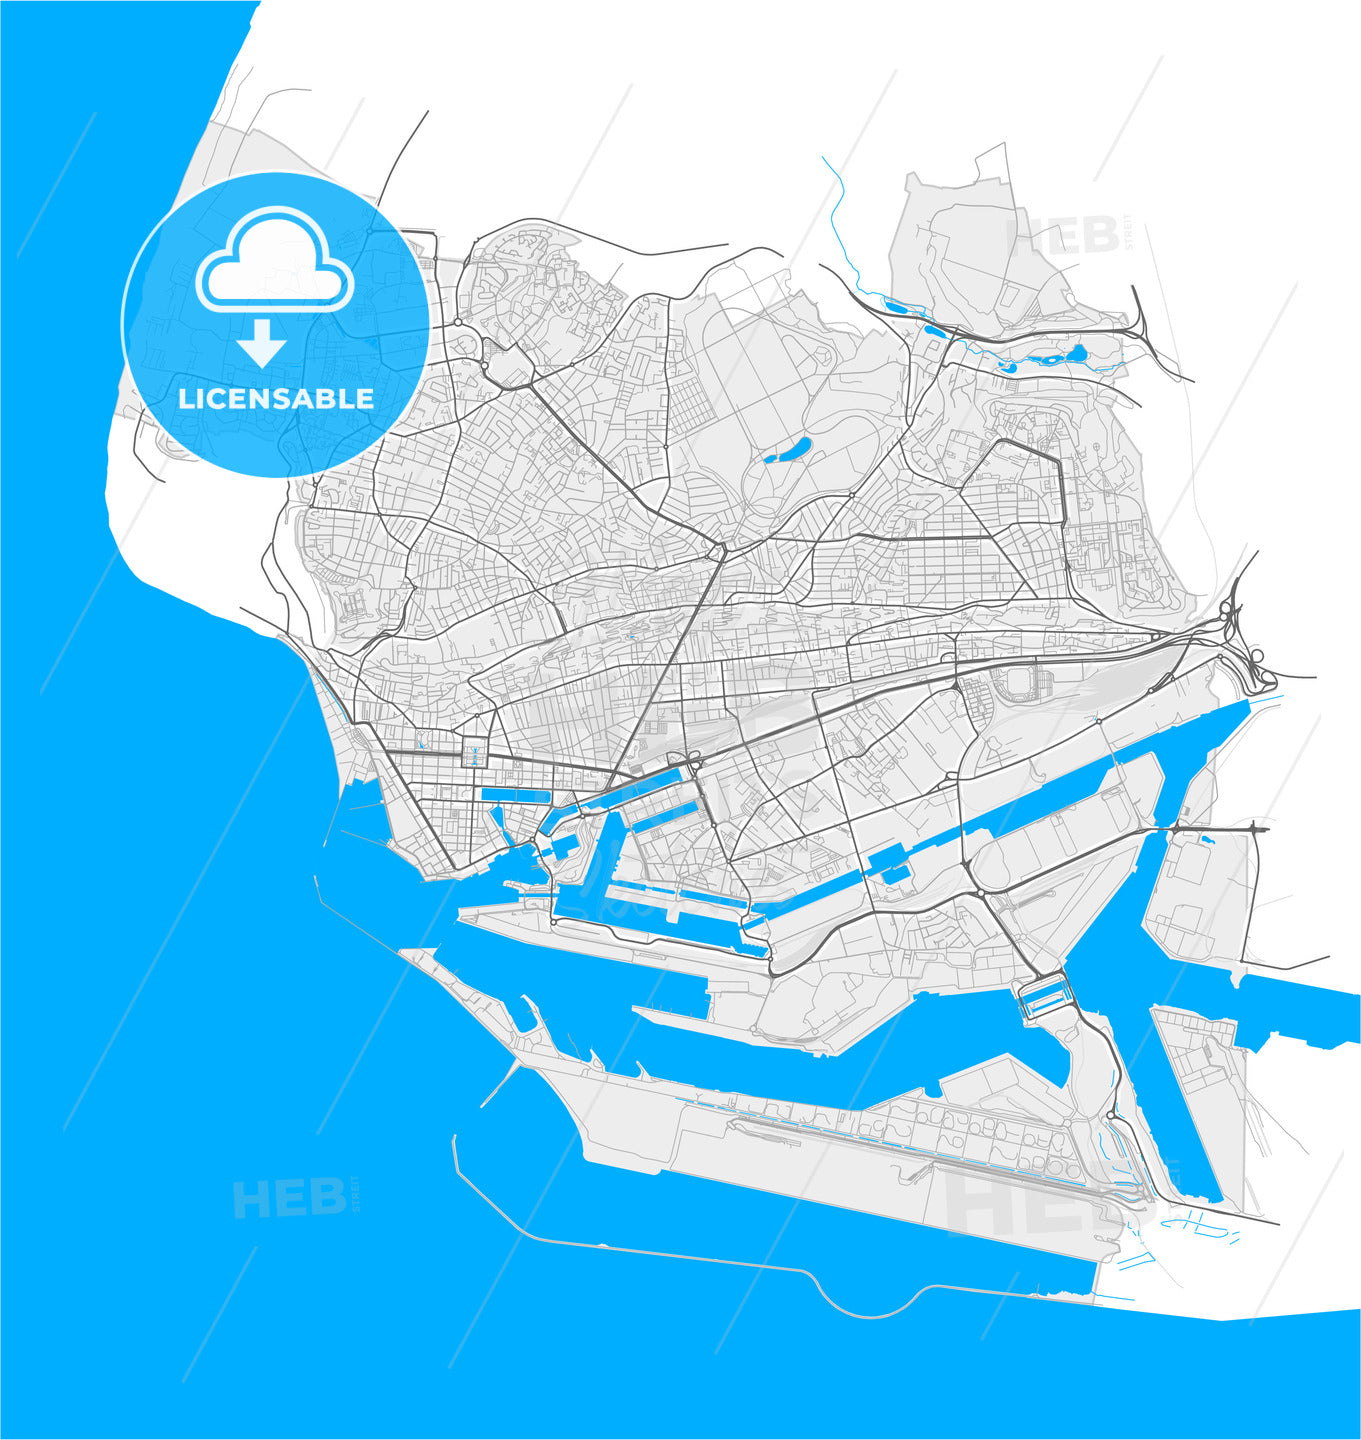 Le Havre, Seine-Maritime, France, high quality vector map